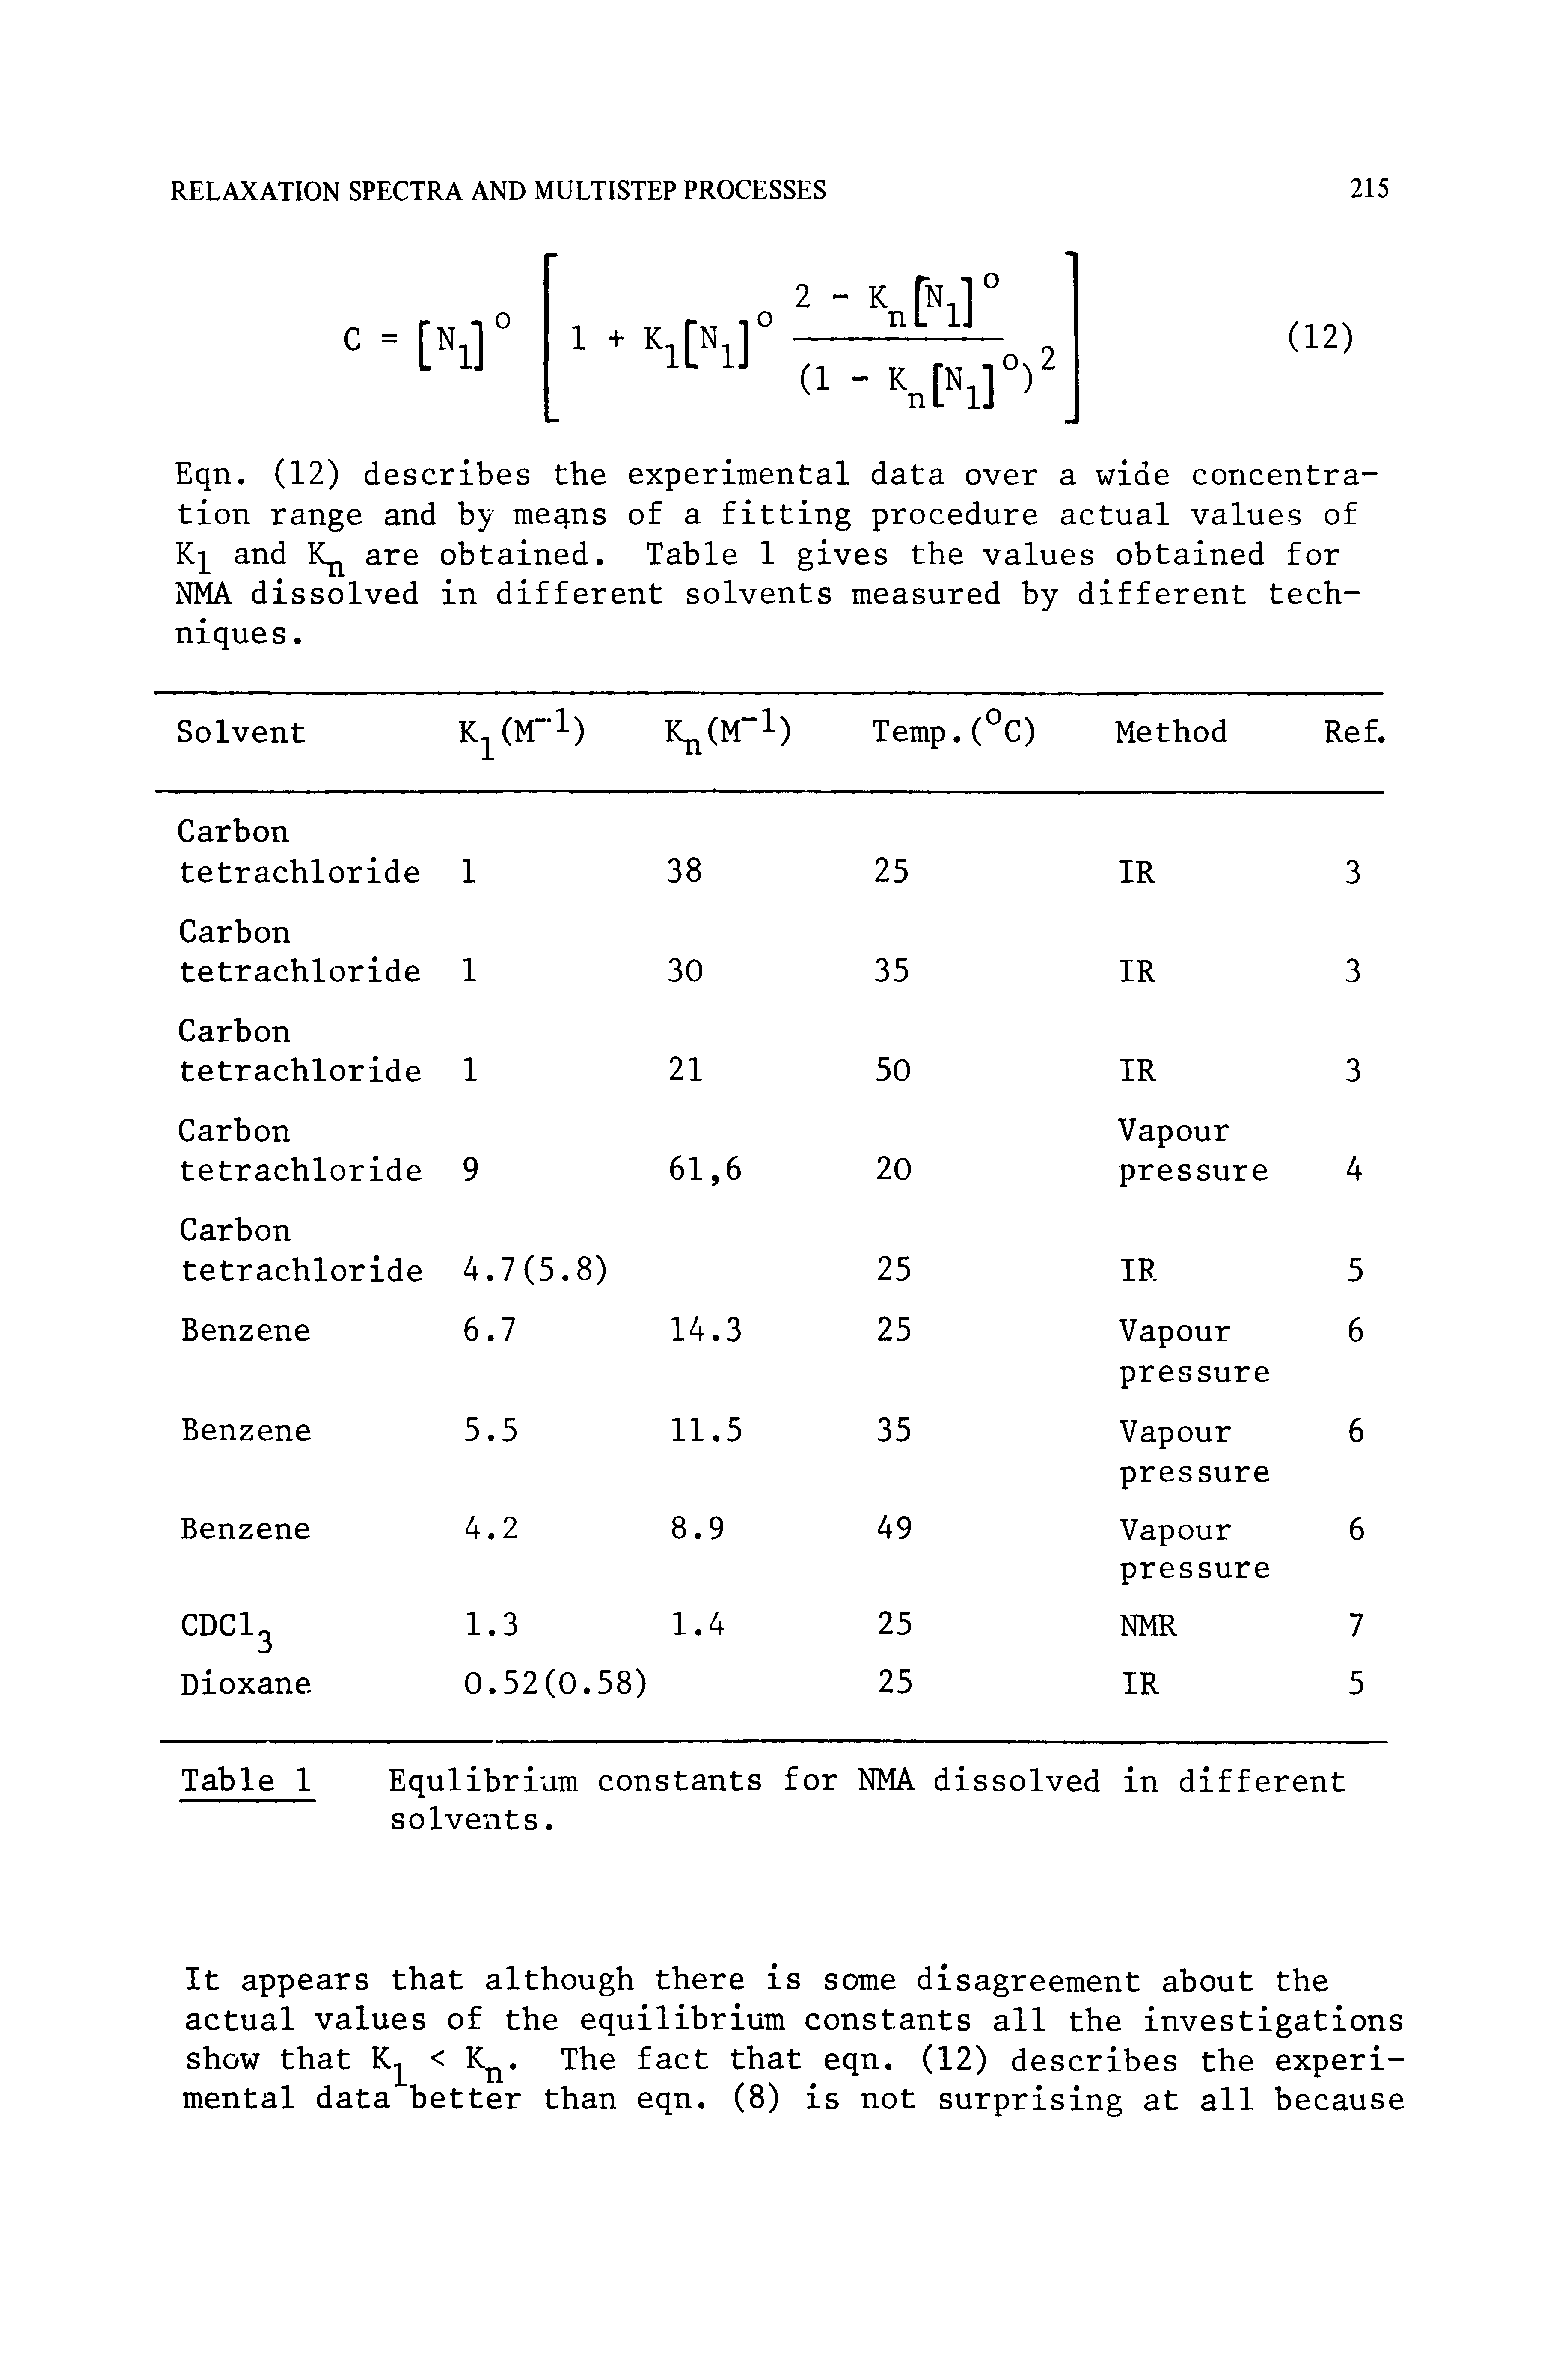 Table 1 Equlibrium constants for NMA dissolved in different solvents.